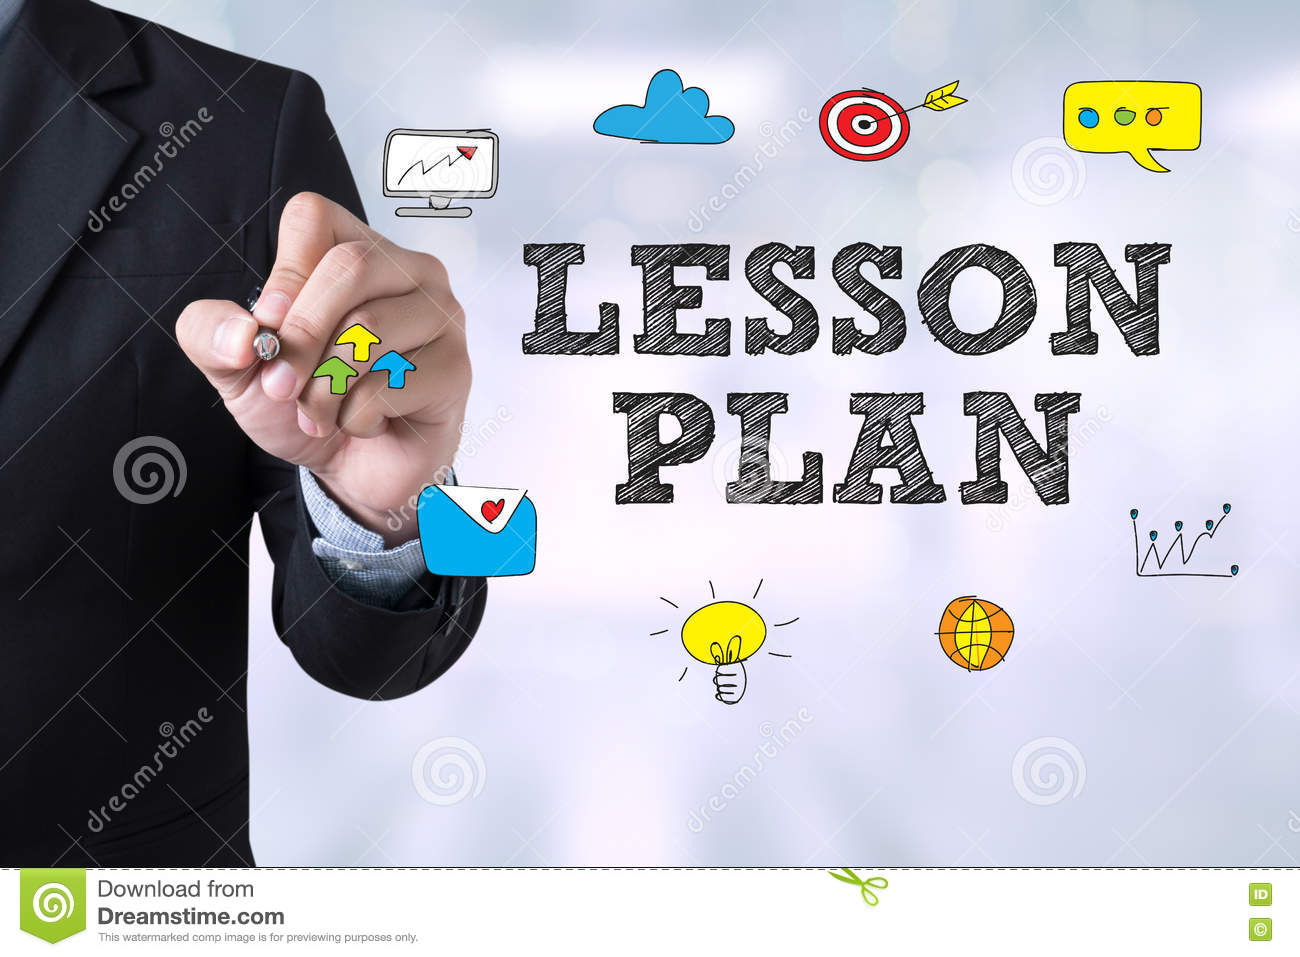 PDT107 Lesson Planning and Classroom Management